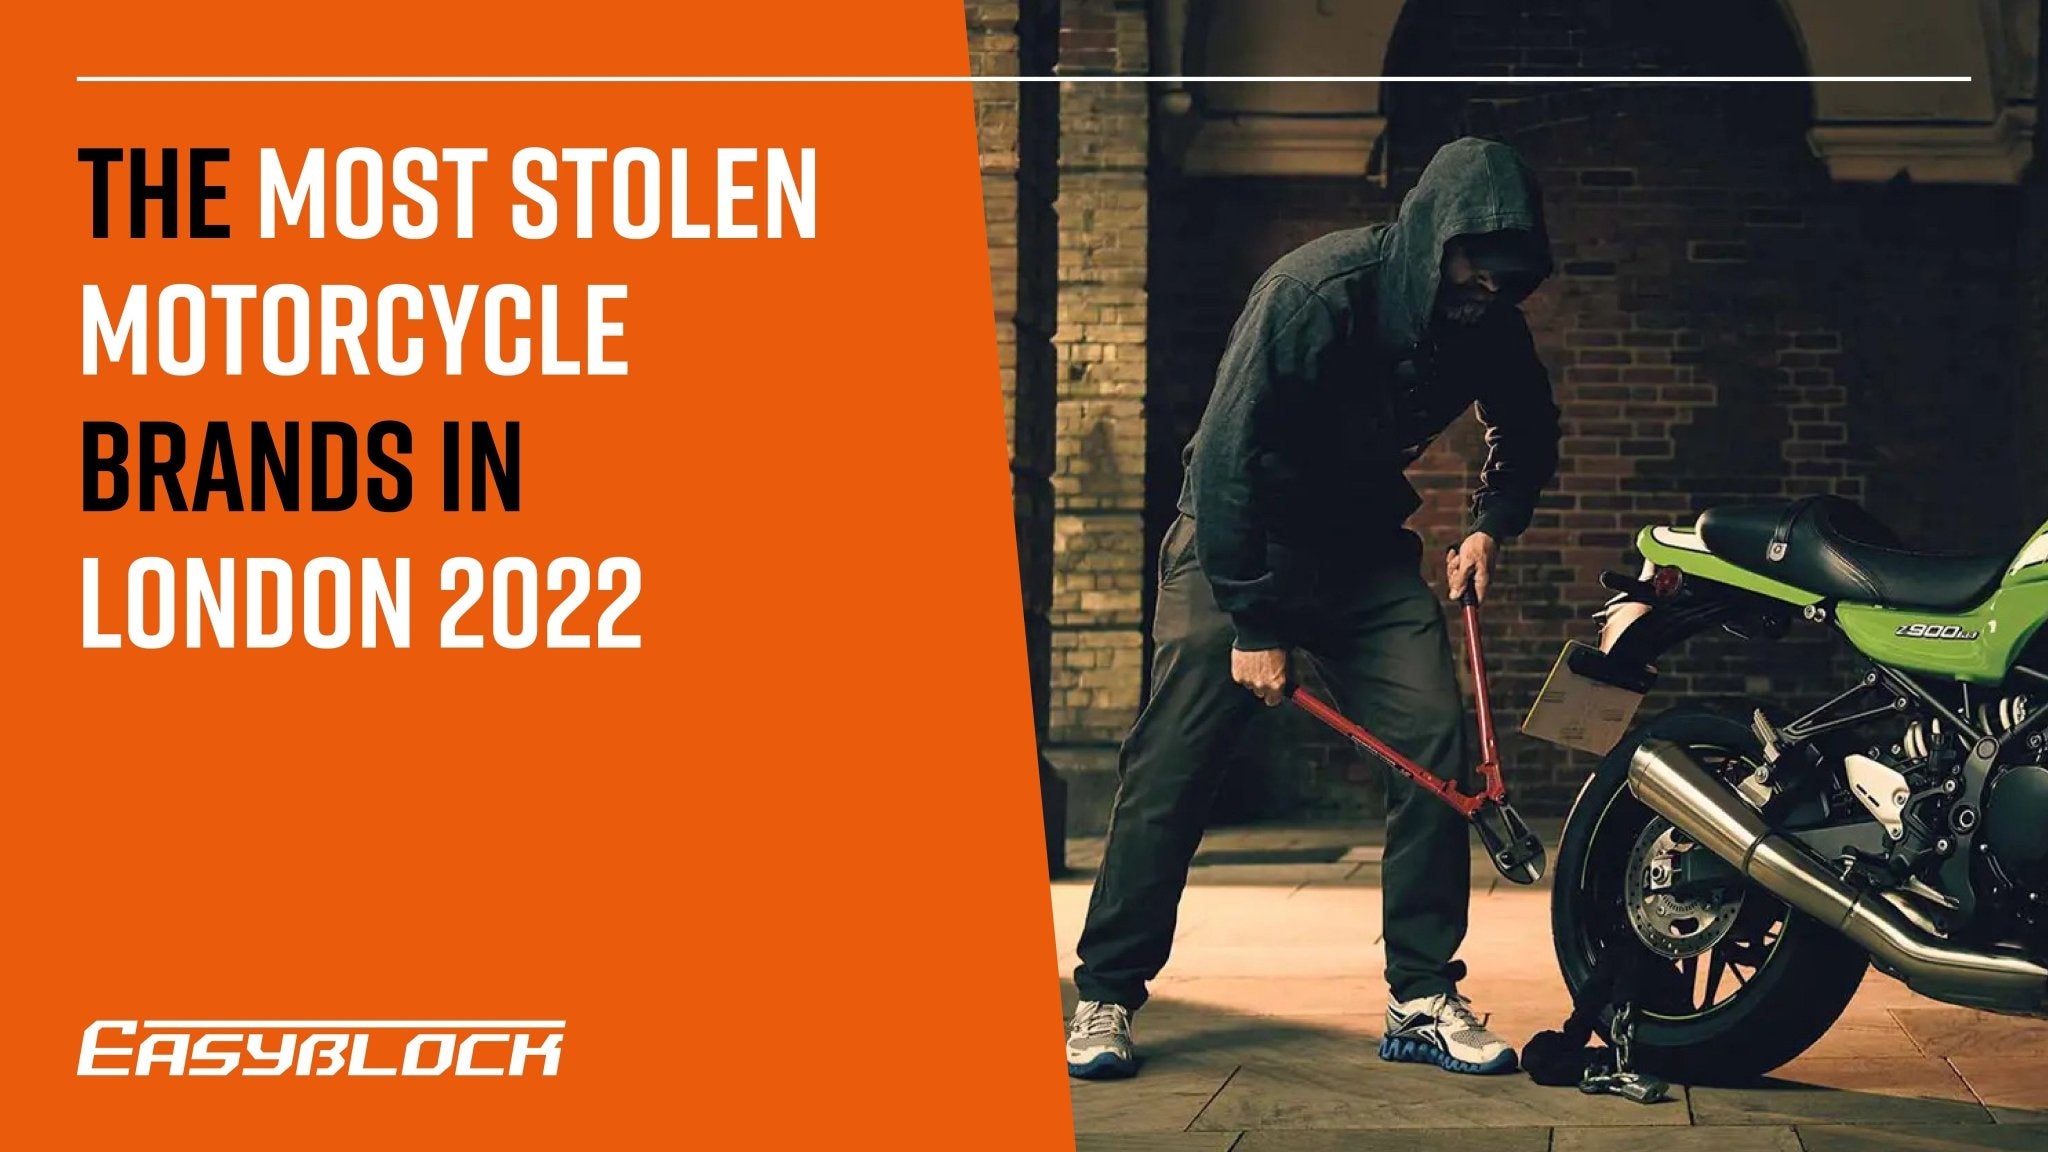 The Most Stolen Motorcycle Brands in London (2022)